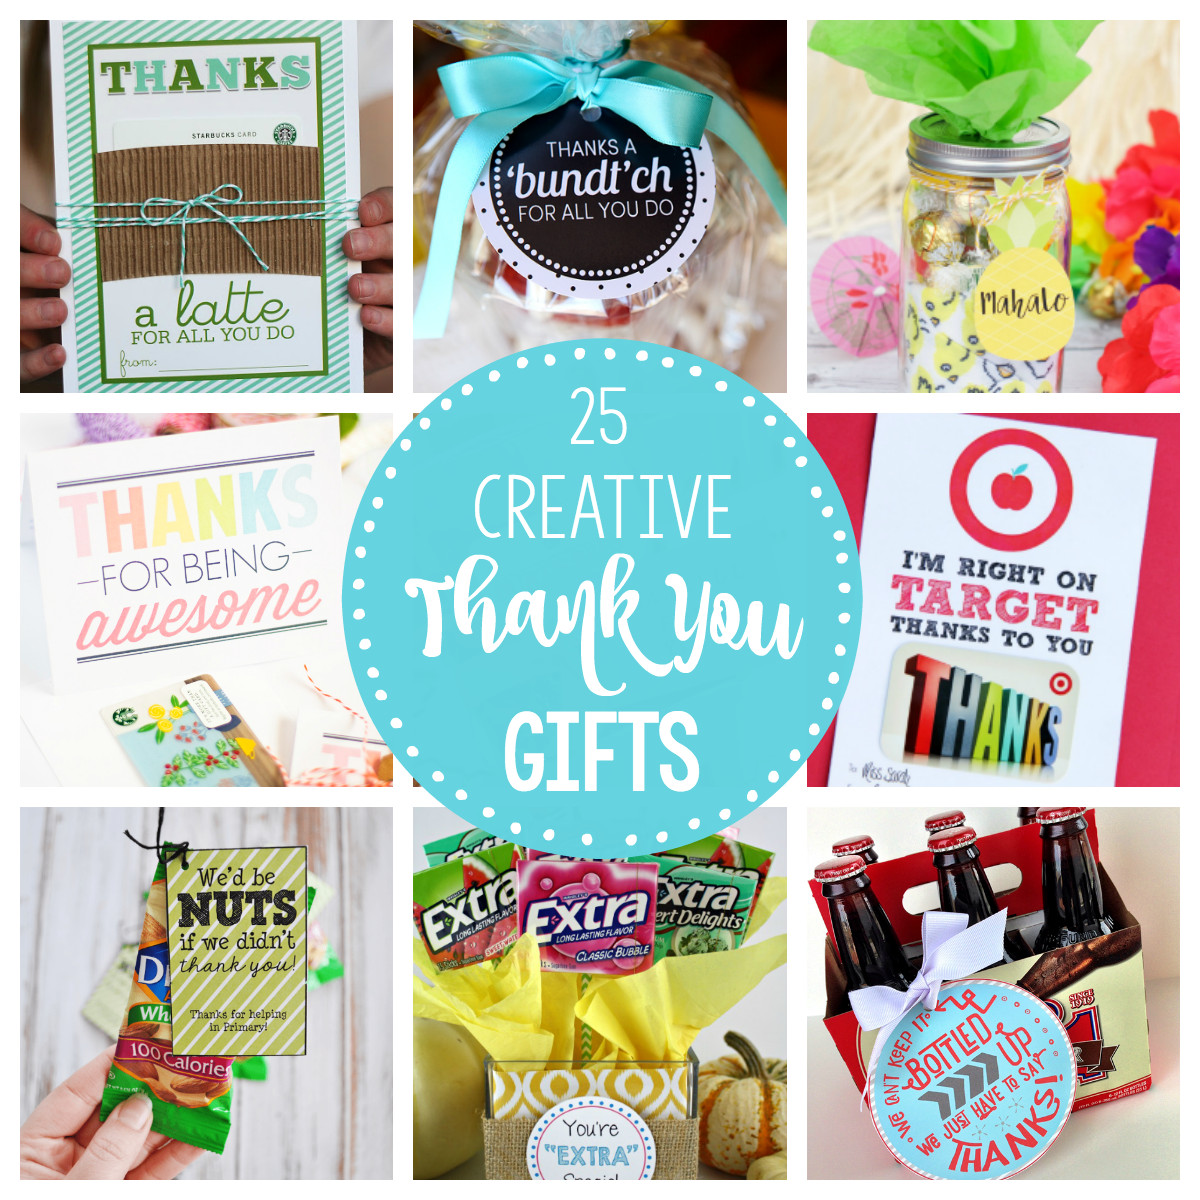 Thank You For Your Service Gift Ideas
 25 Creative & Unique Thank You Gifts – Fun Squared